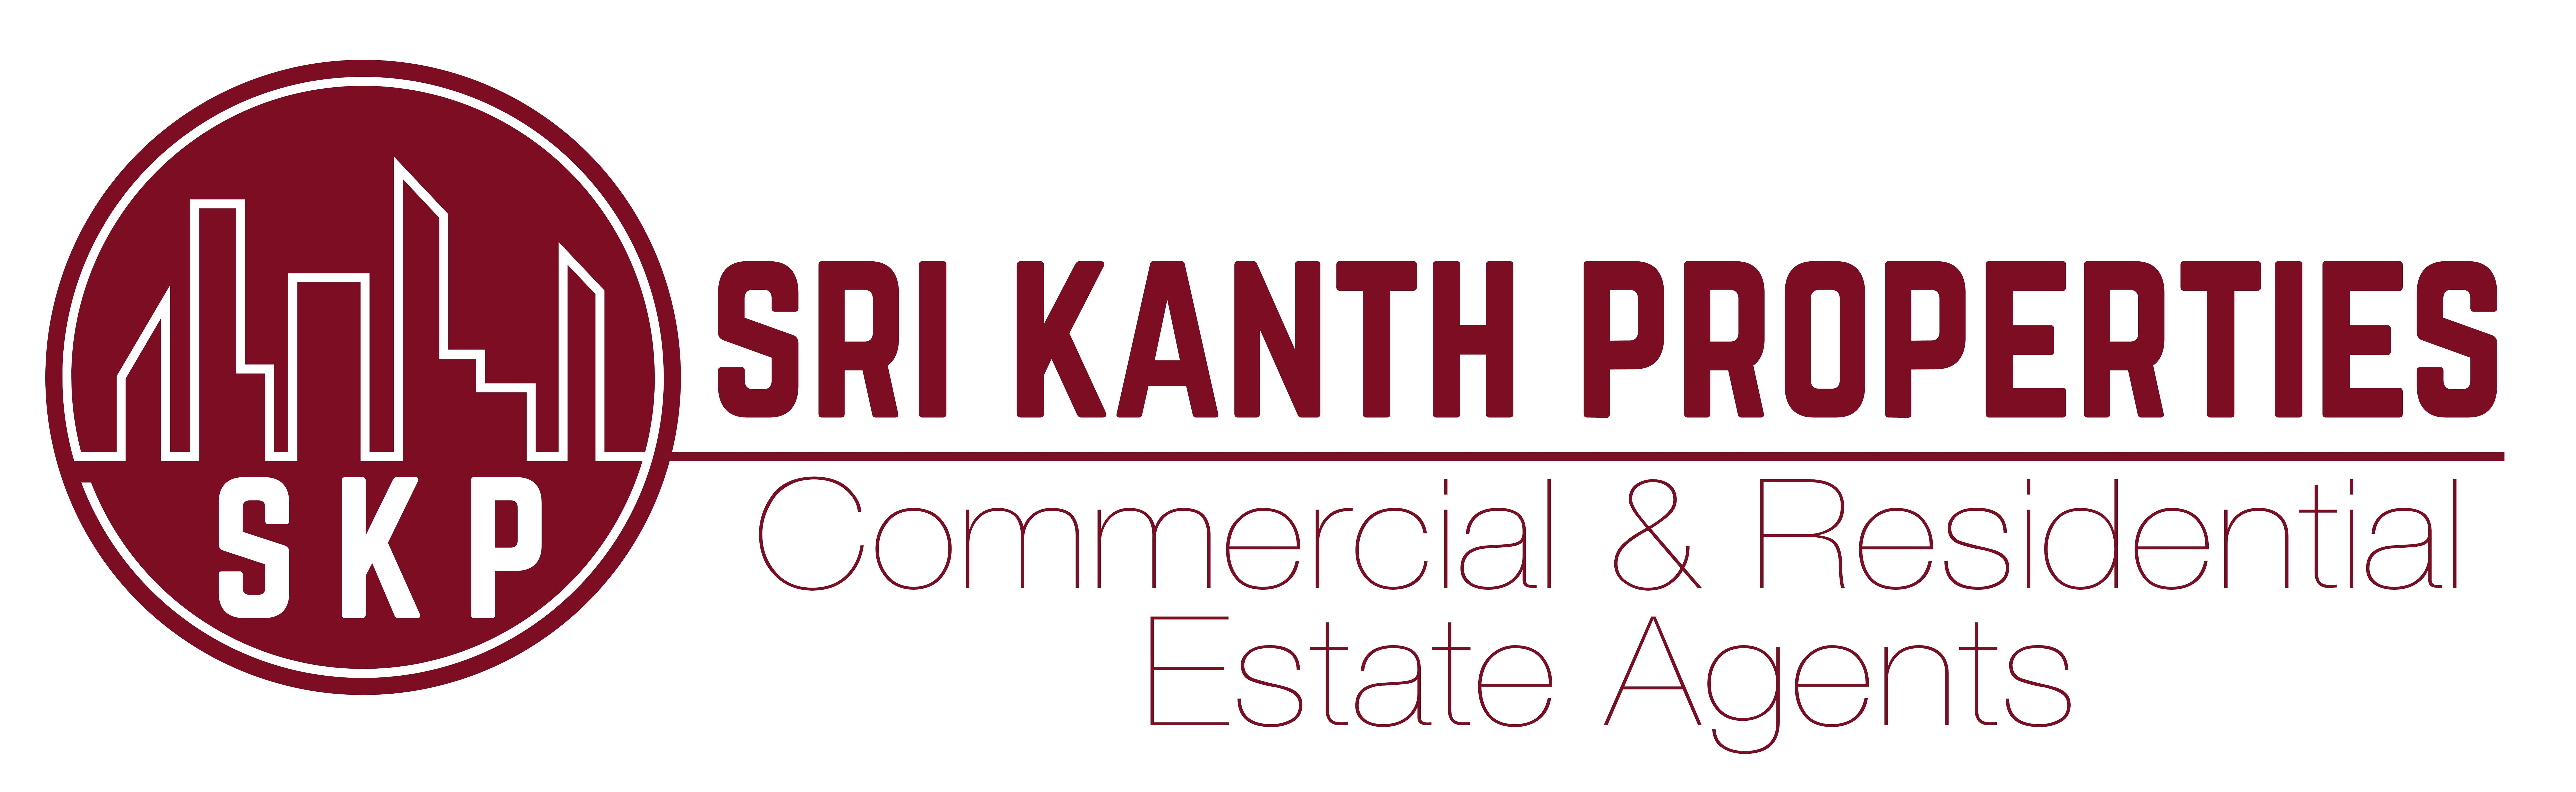 Sri Kanth Properties - London : Letting agents in Wembley Greater London Brent